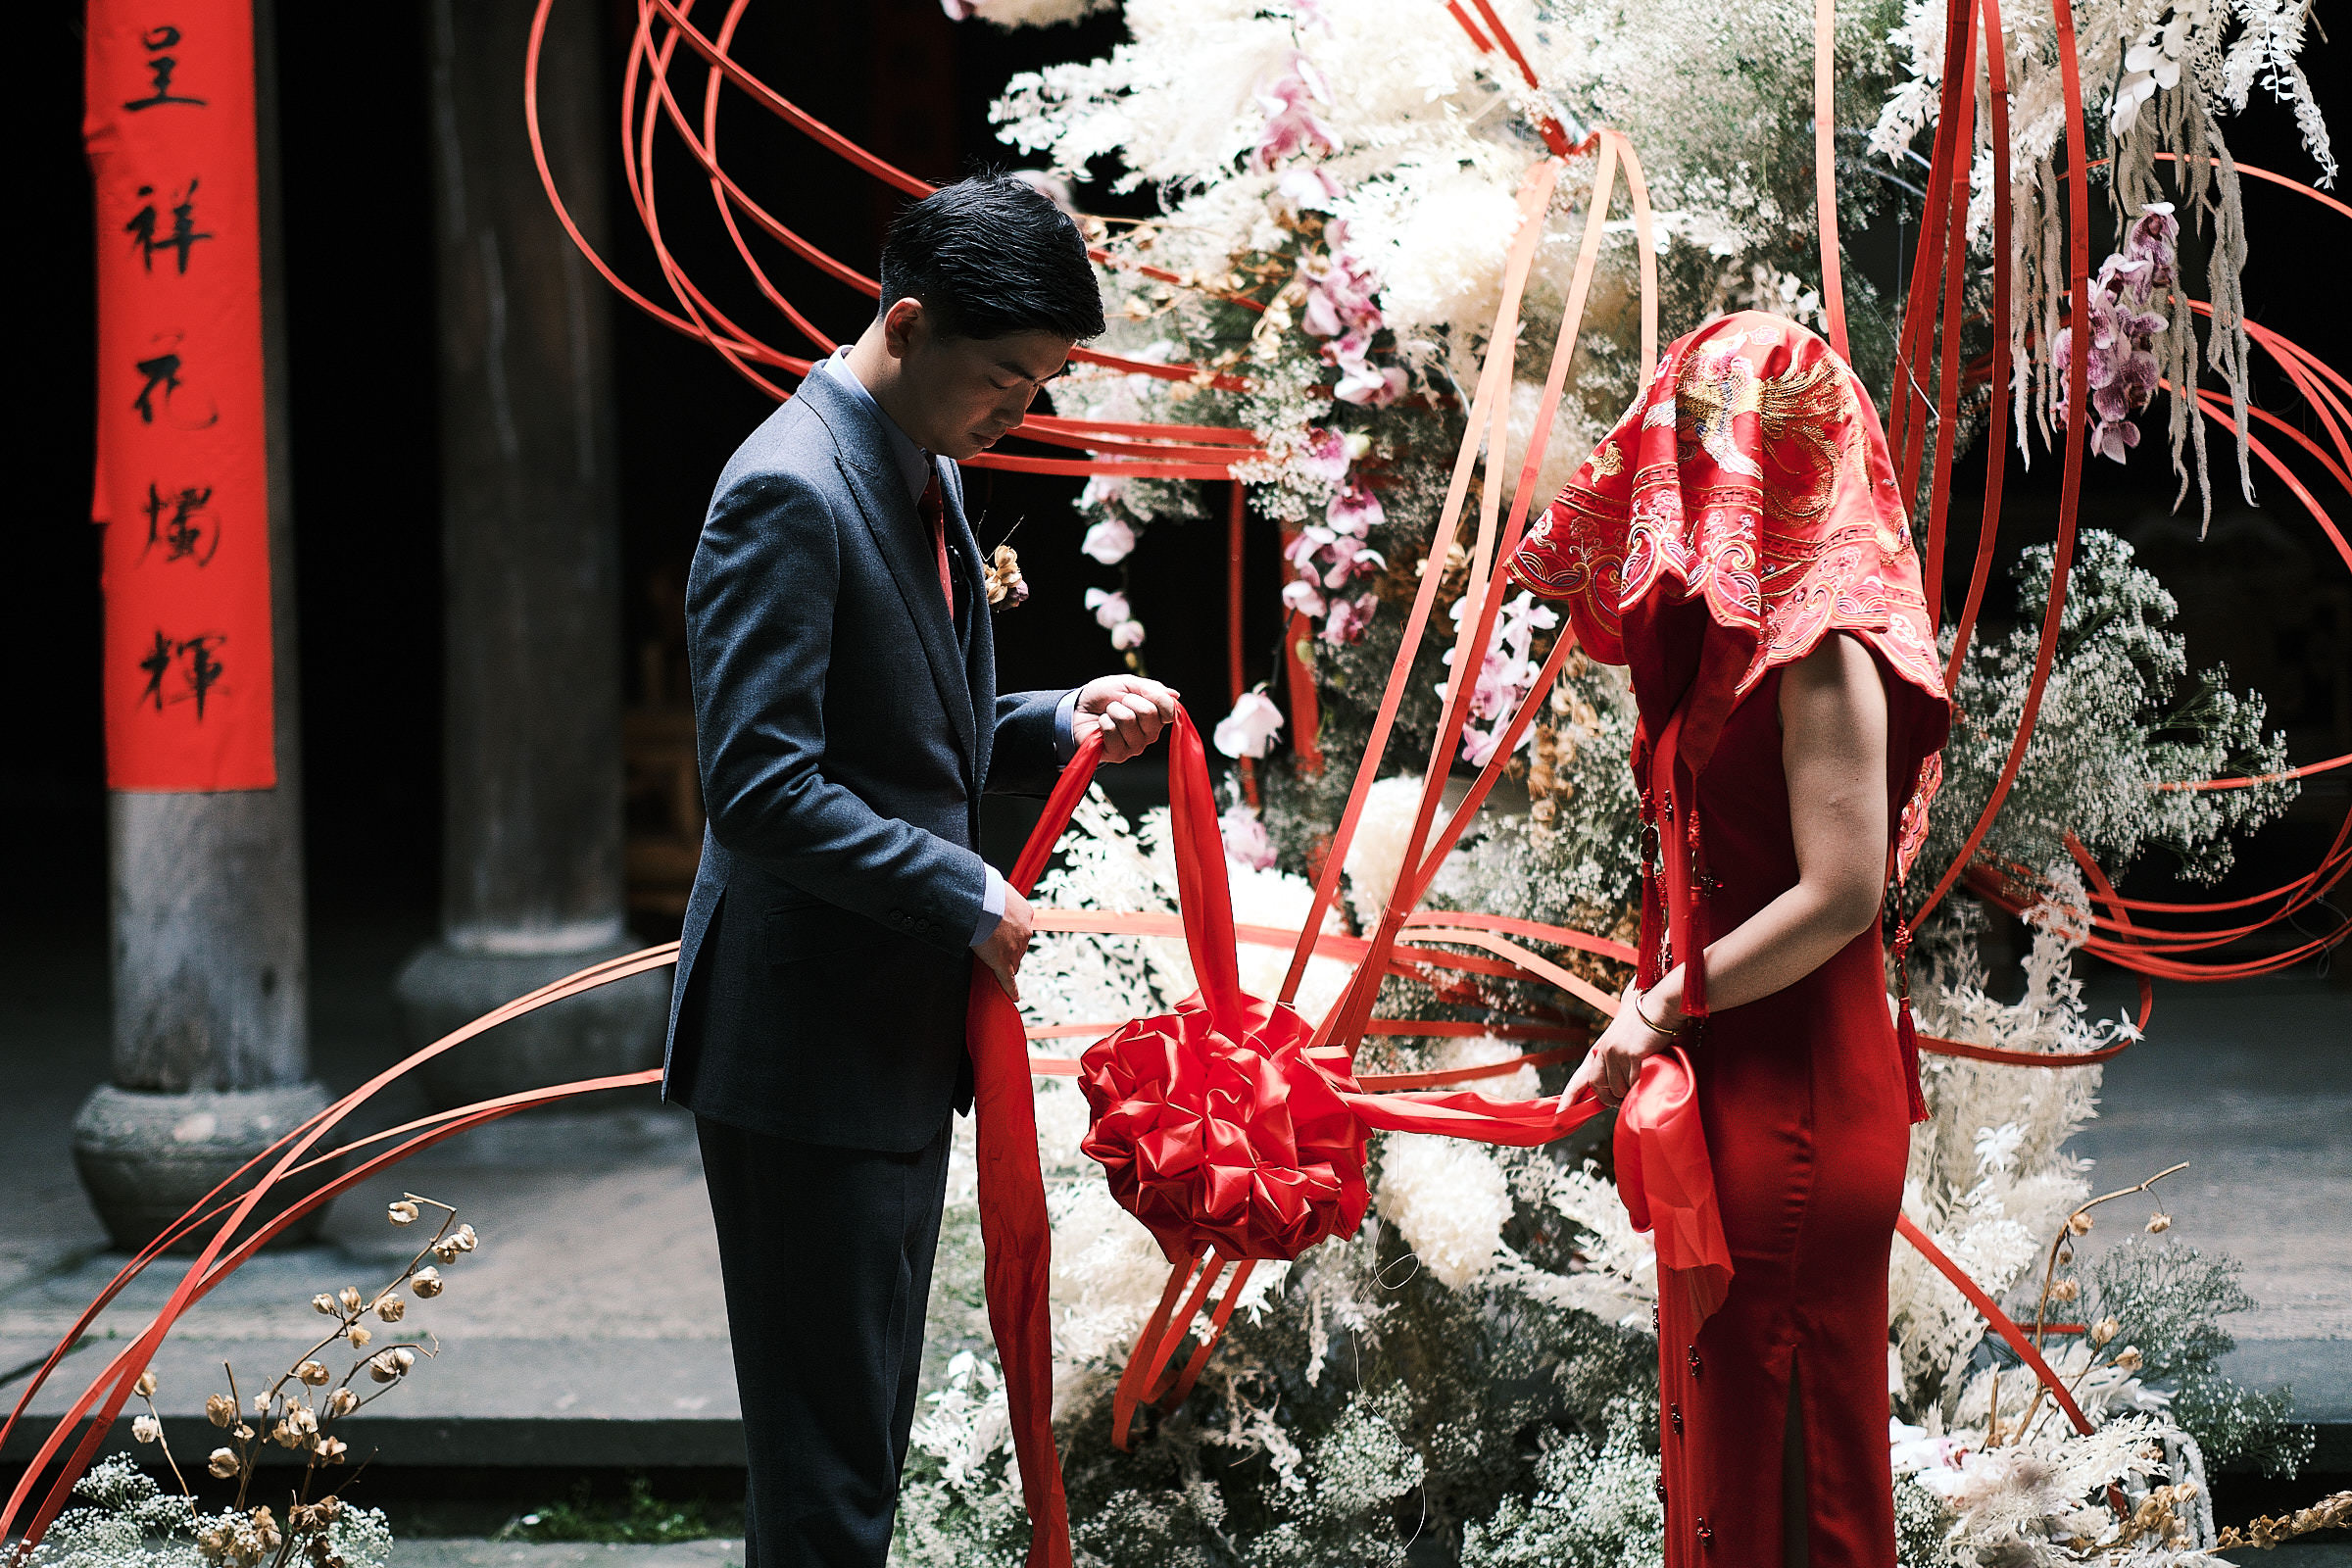 Groom And Bride With Covered Red And Dressed In Red Stand In Front Of Floral Sculpture Decorations